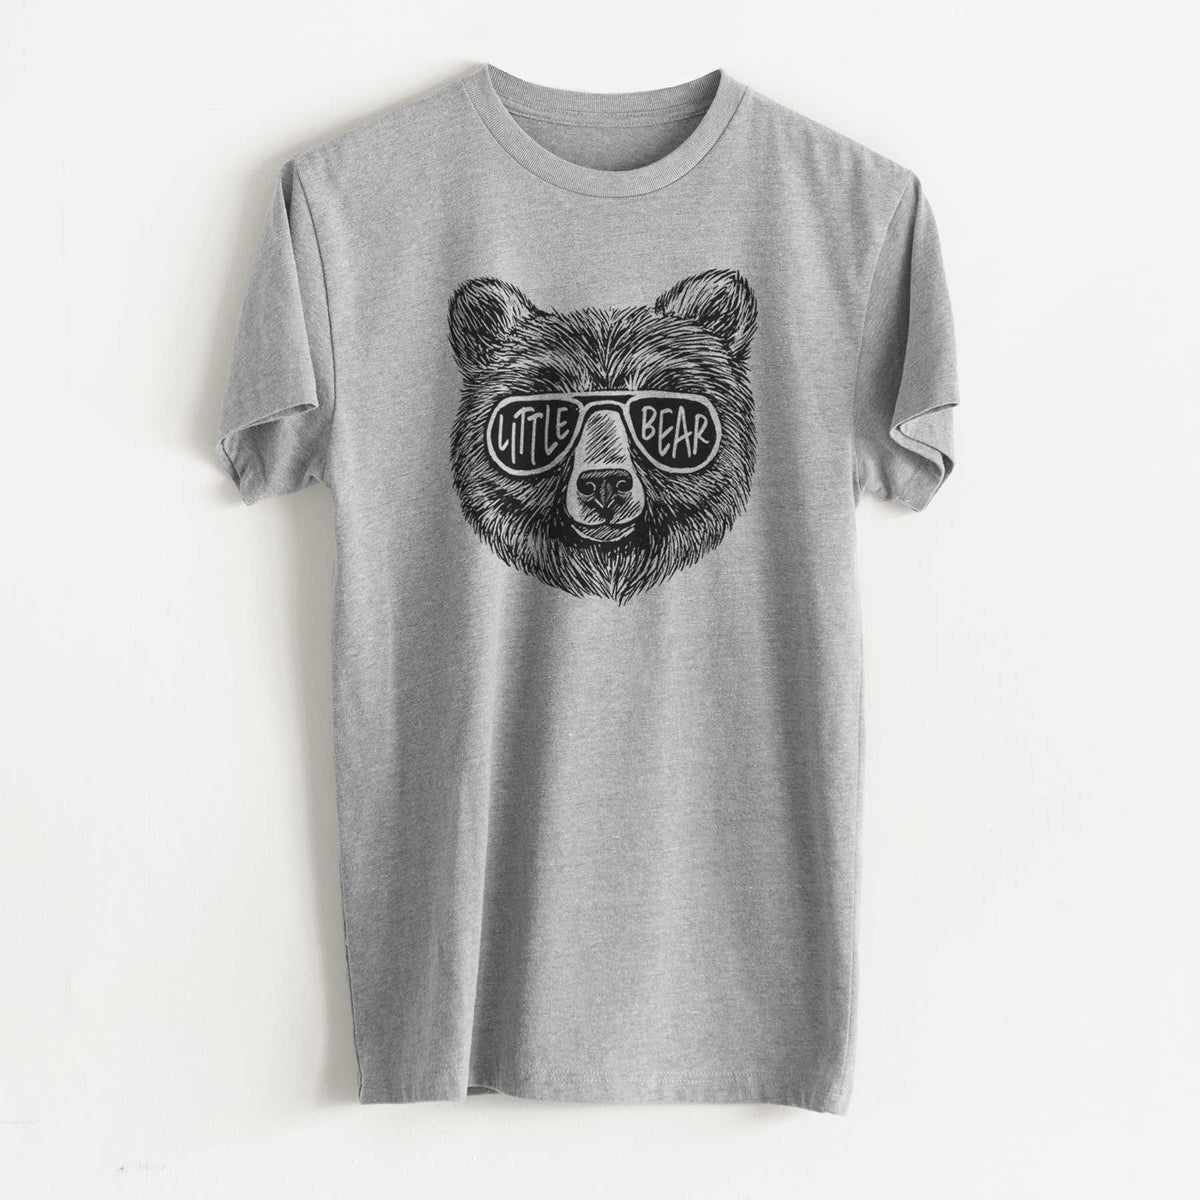 Little Bear - Unisex Recycled Eco Tee  - CLOSEOUT - FINAL SALE